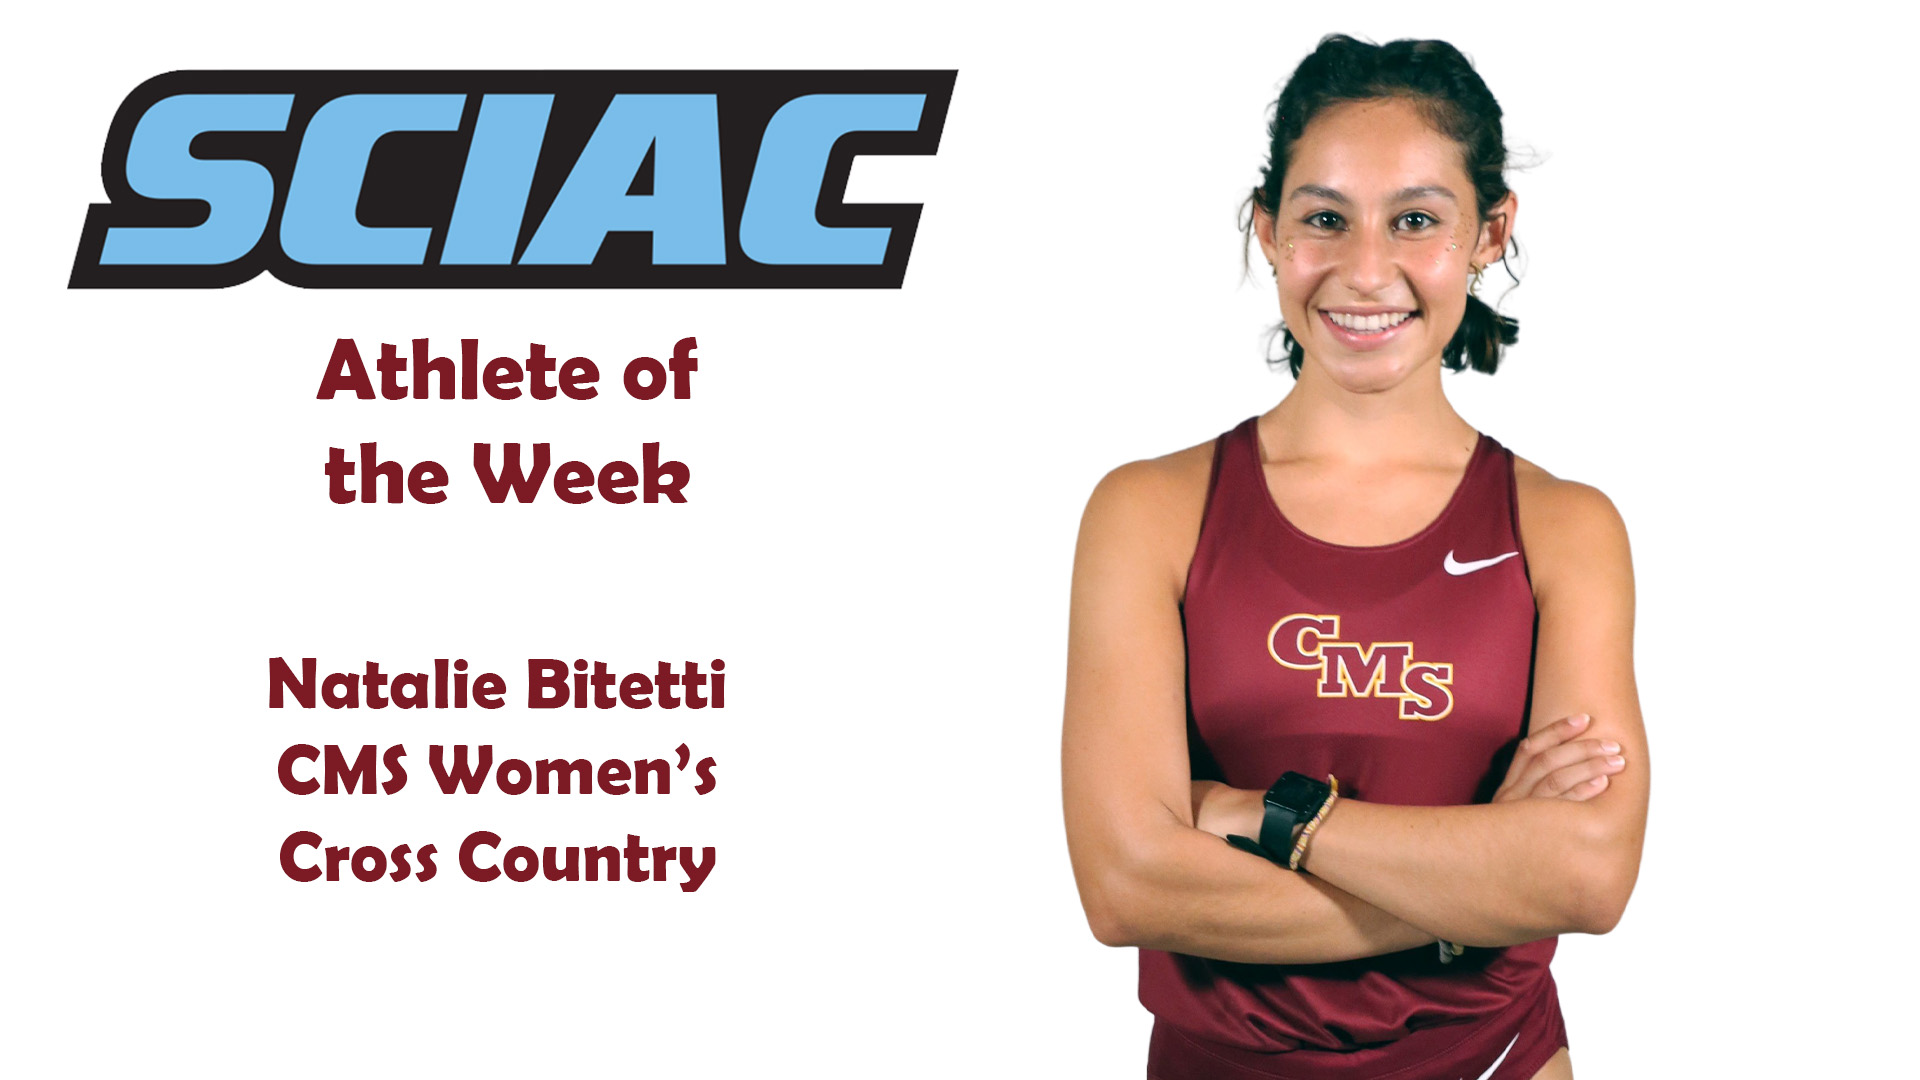 Posed shot of Natalie Bitetti with the SCIAC logo